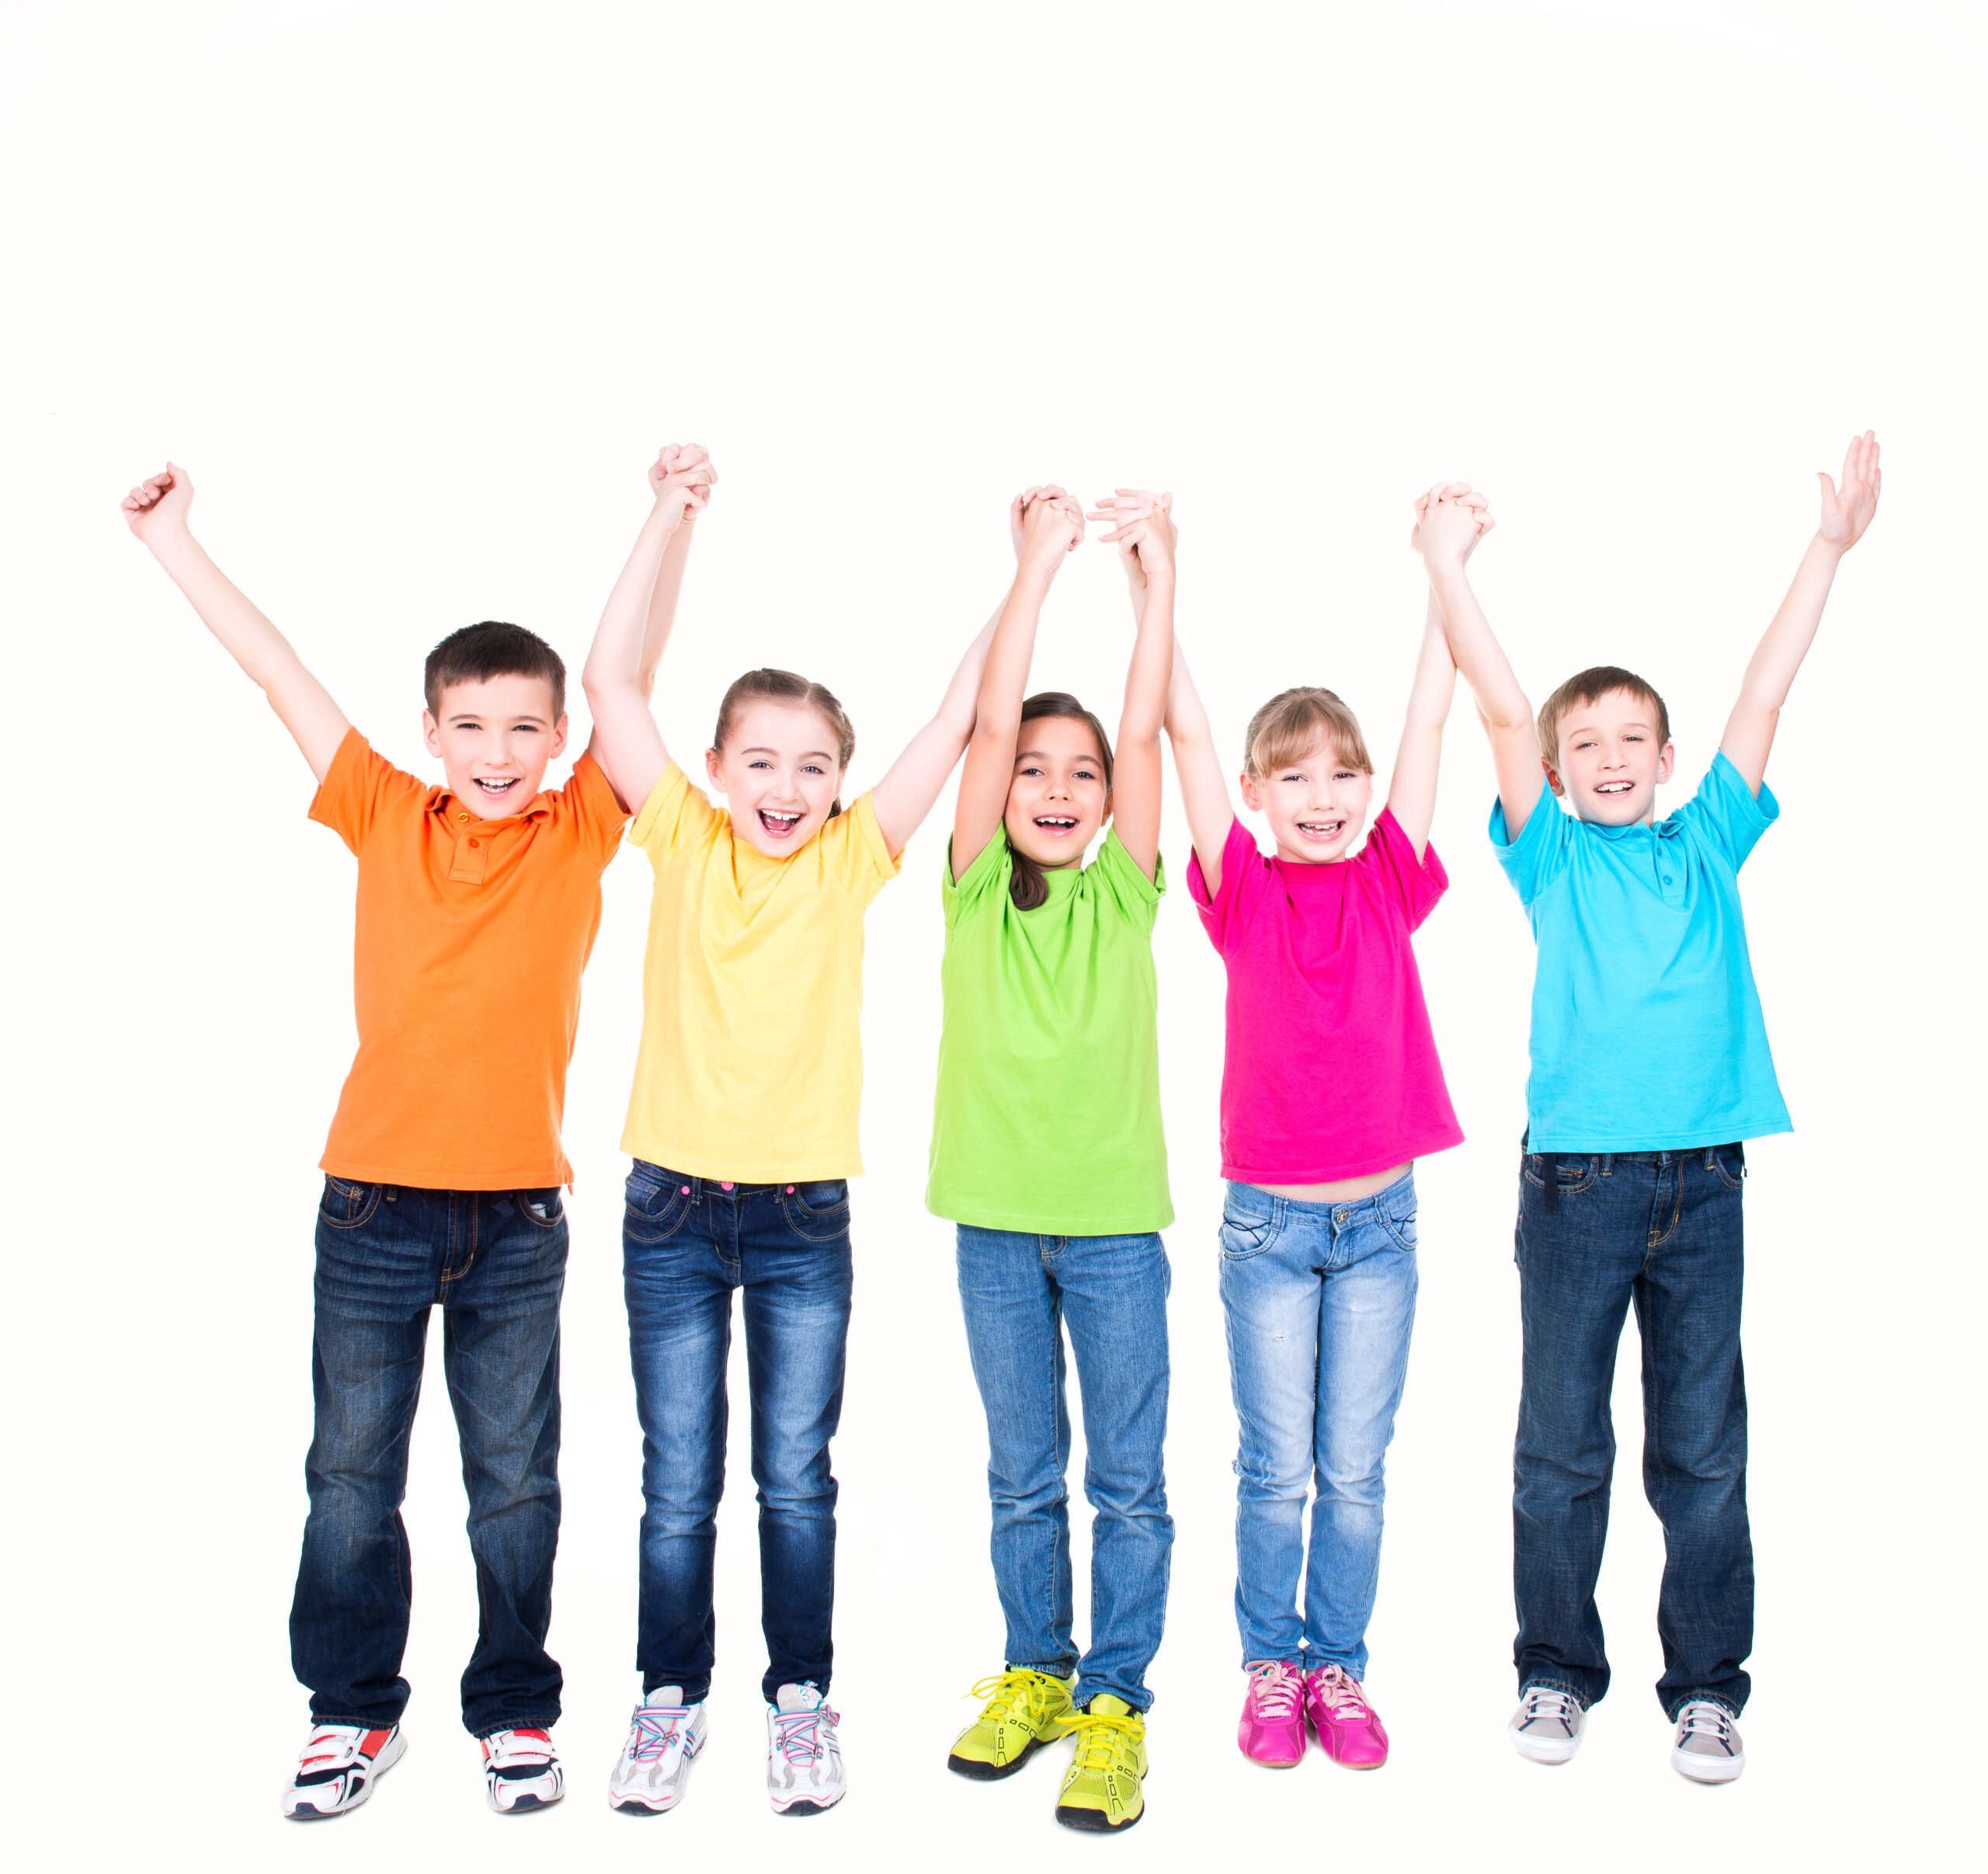 Group of smiling kids with raised hands in colorful t-shirts standing together - isolated on white.